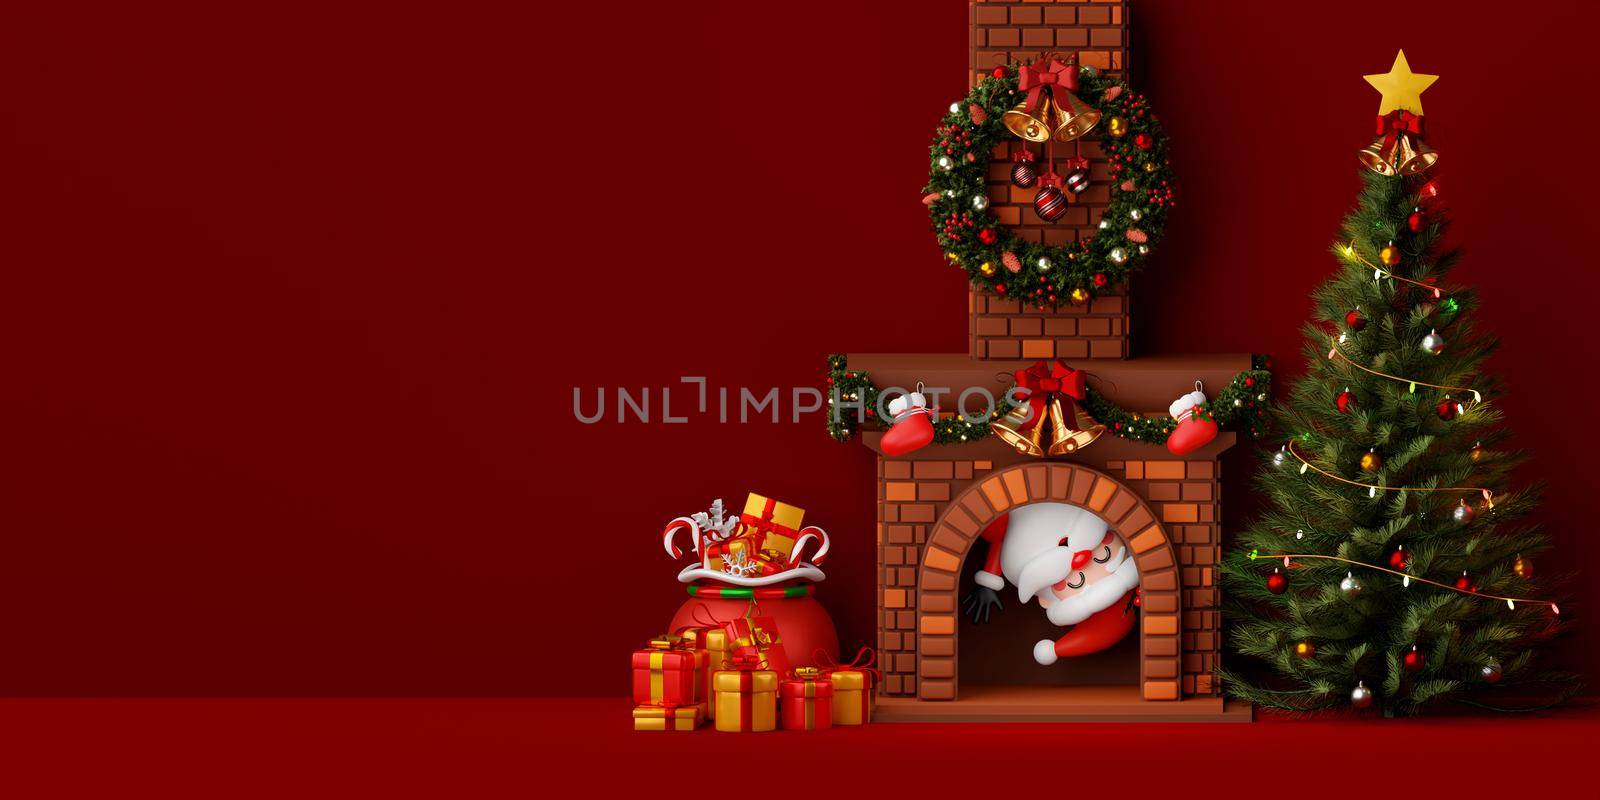 Santa Claus in fireplace in room decorated by Christmas tree and gift box, 3d illustration